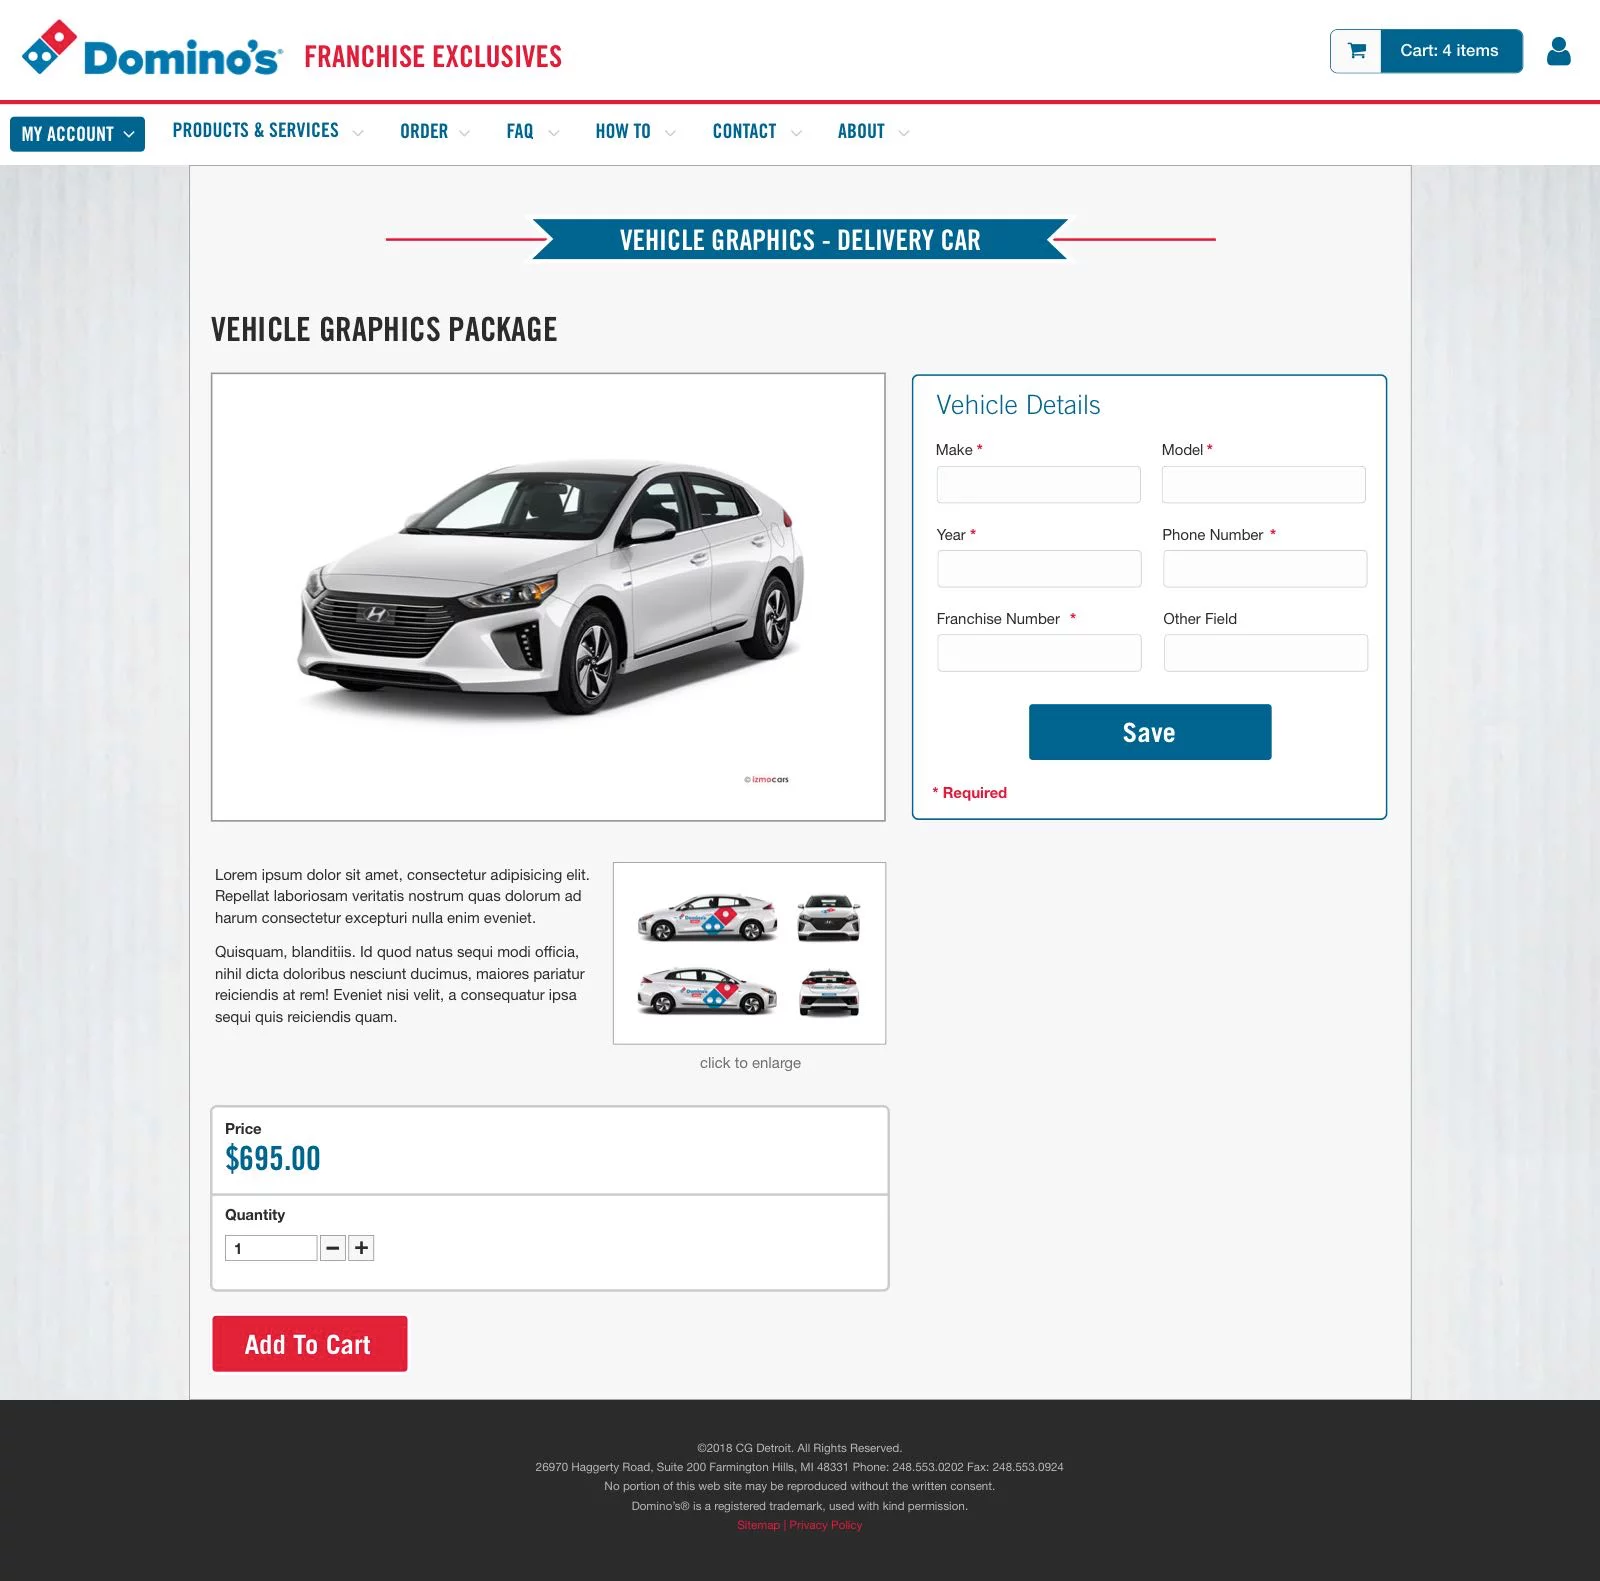 Wireframe - Domino's High Fidelity Vehicle Graphics Order Page